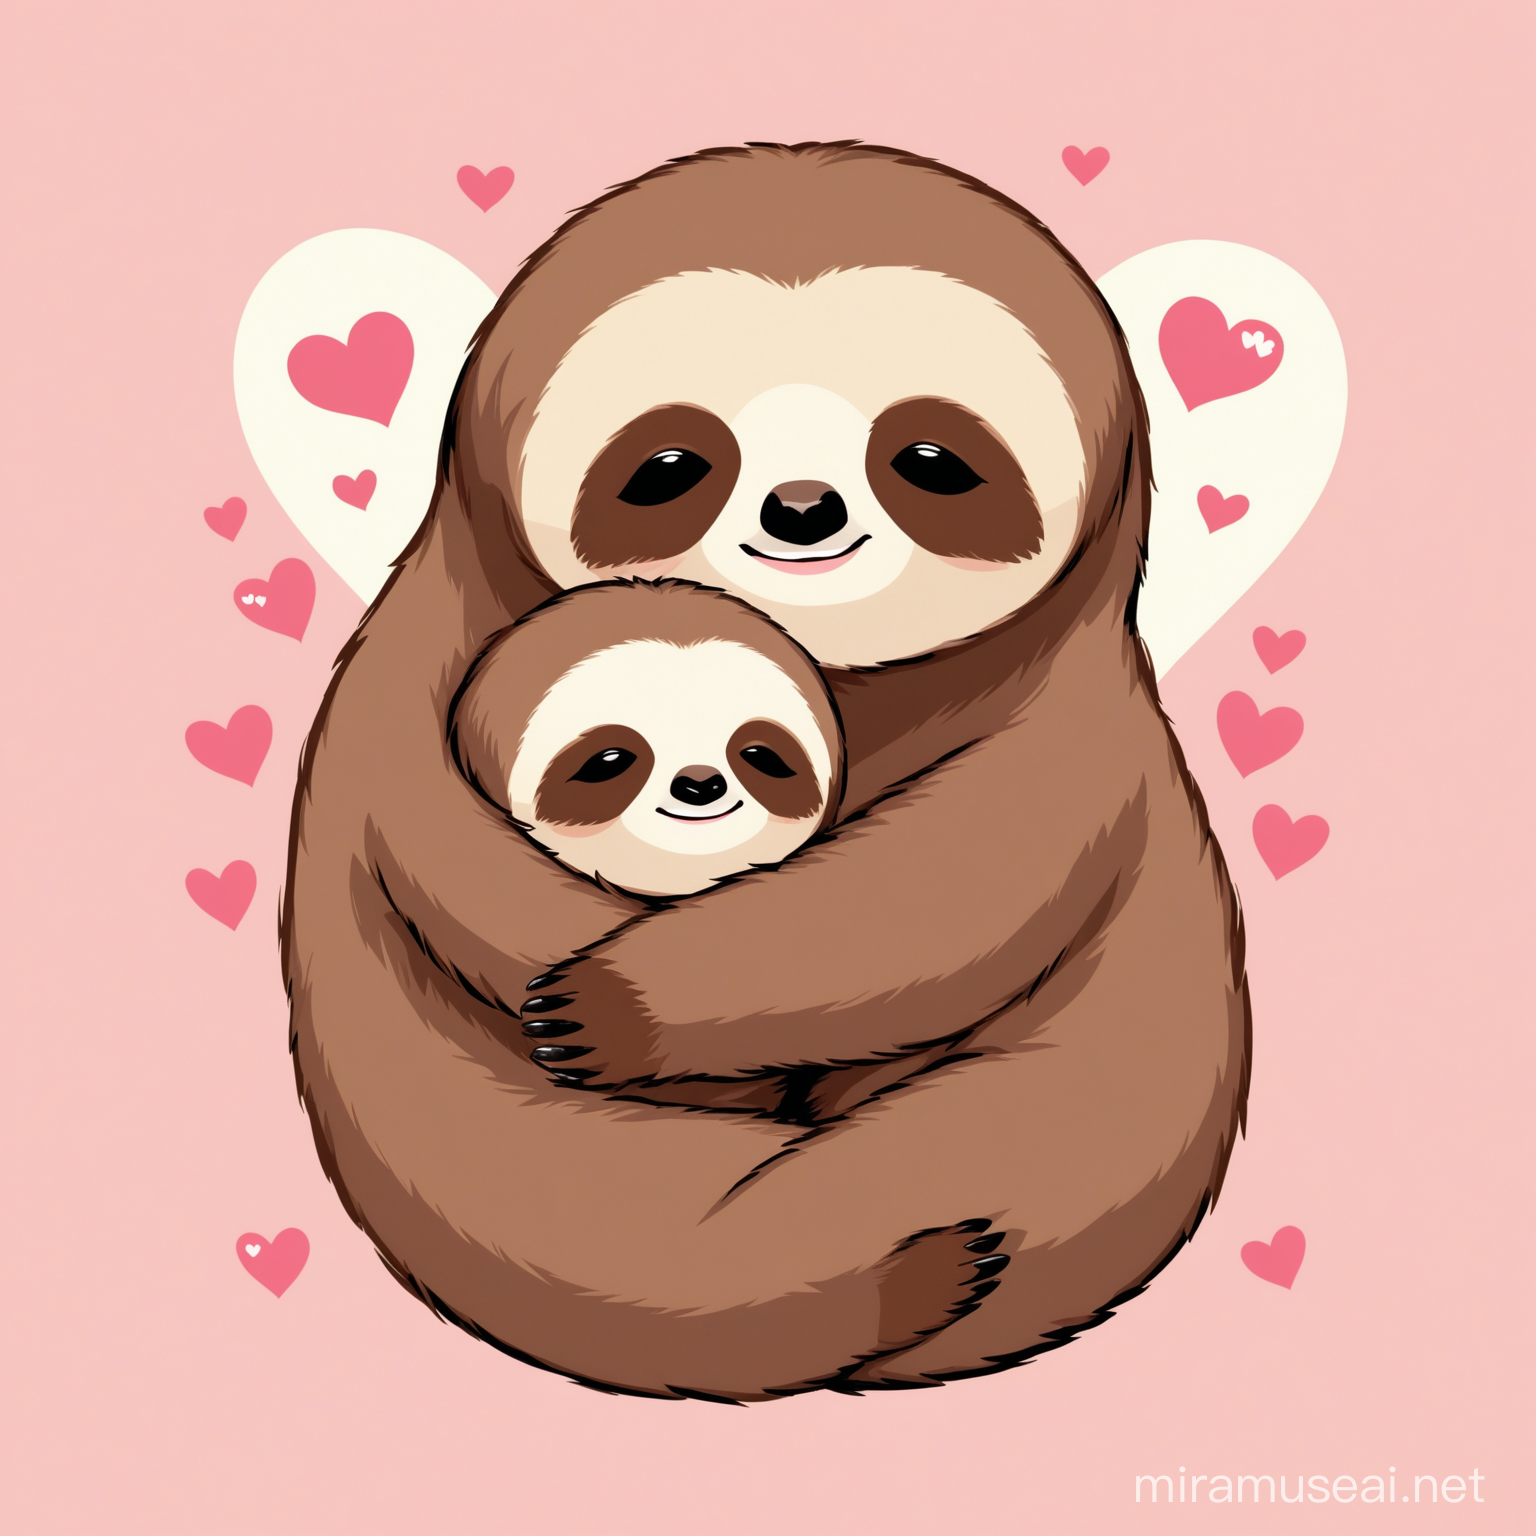 Affectionate Sloths Embracing in the Rainforest Canopy